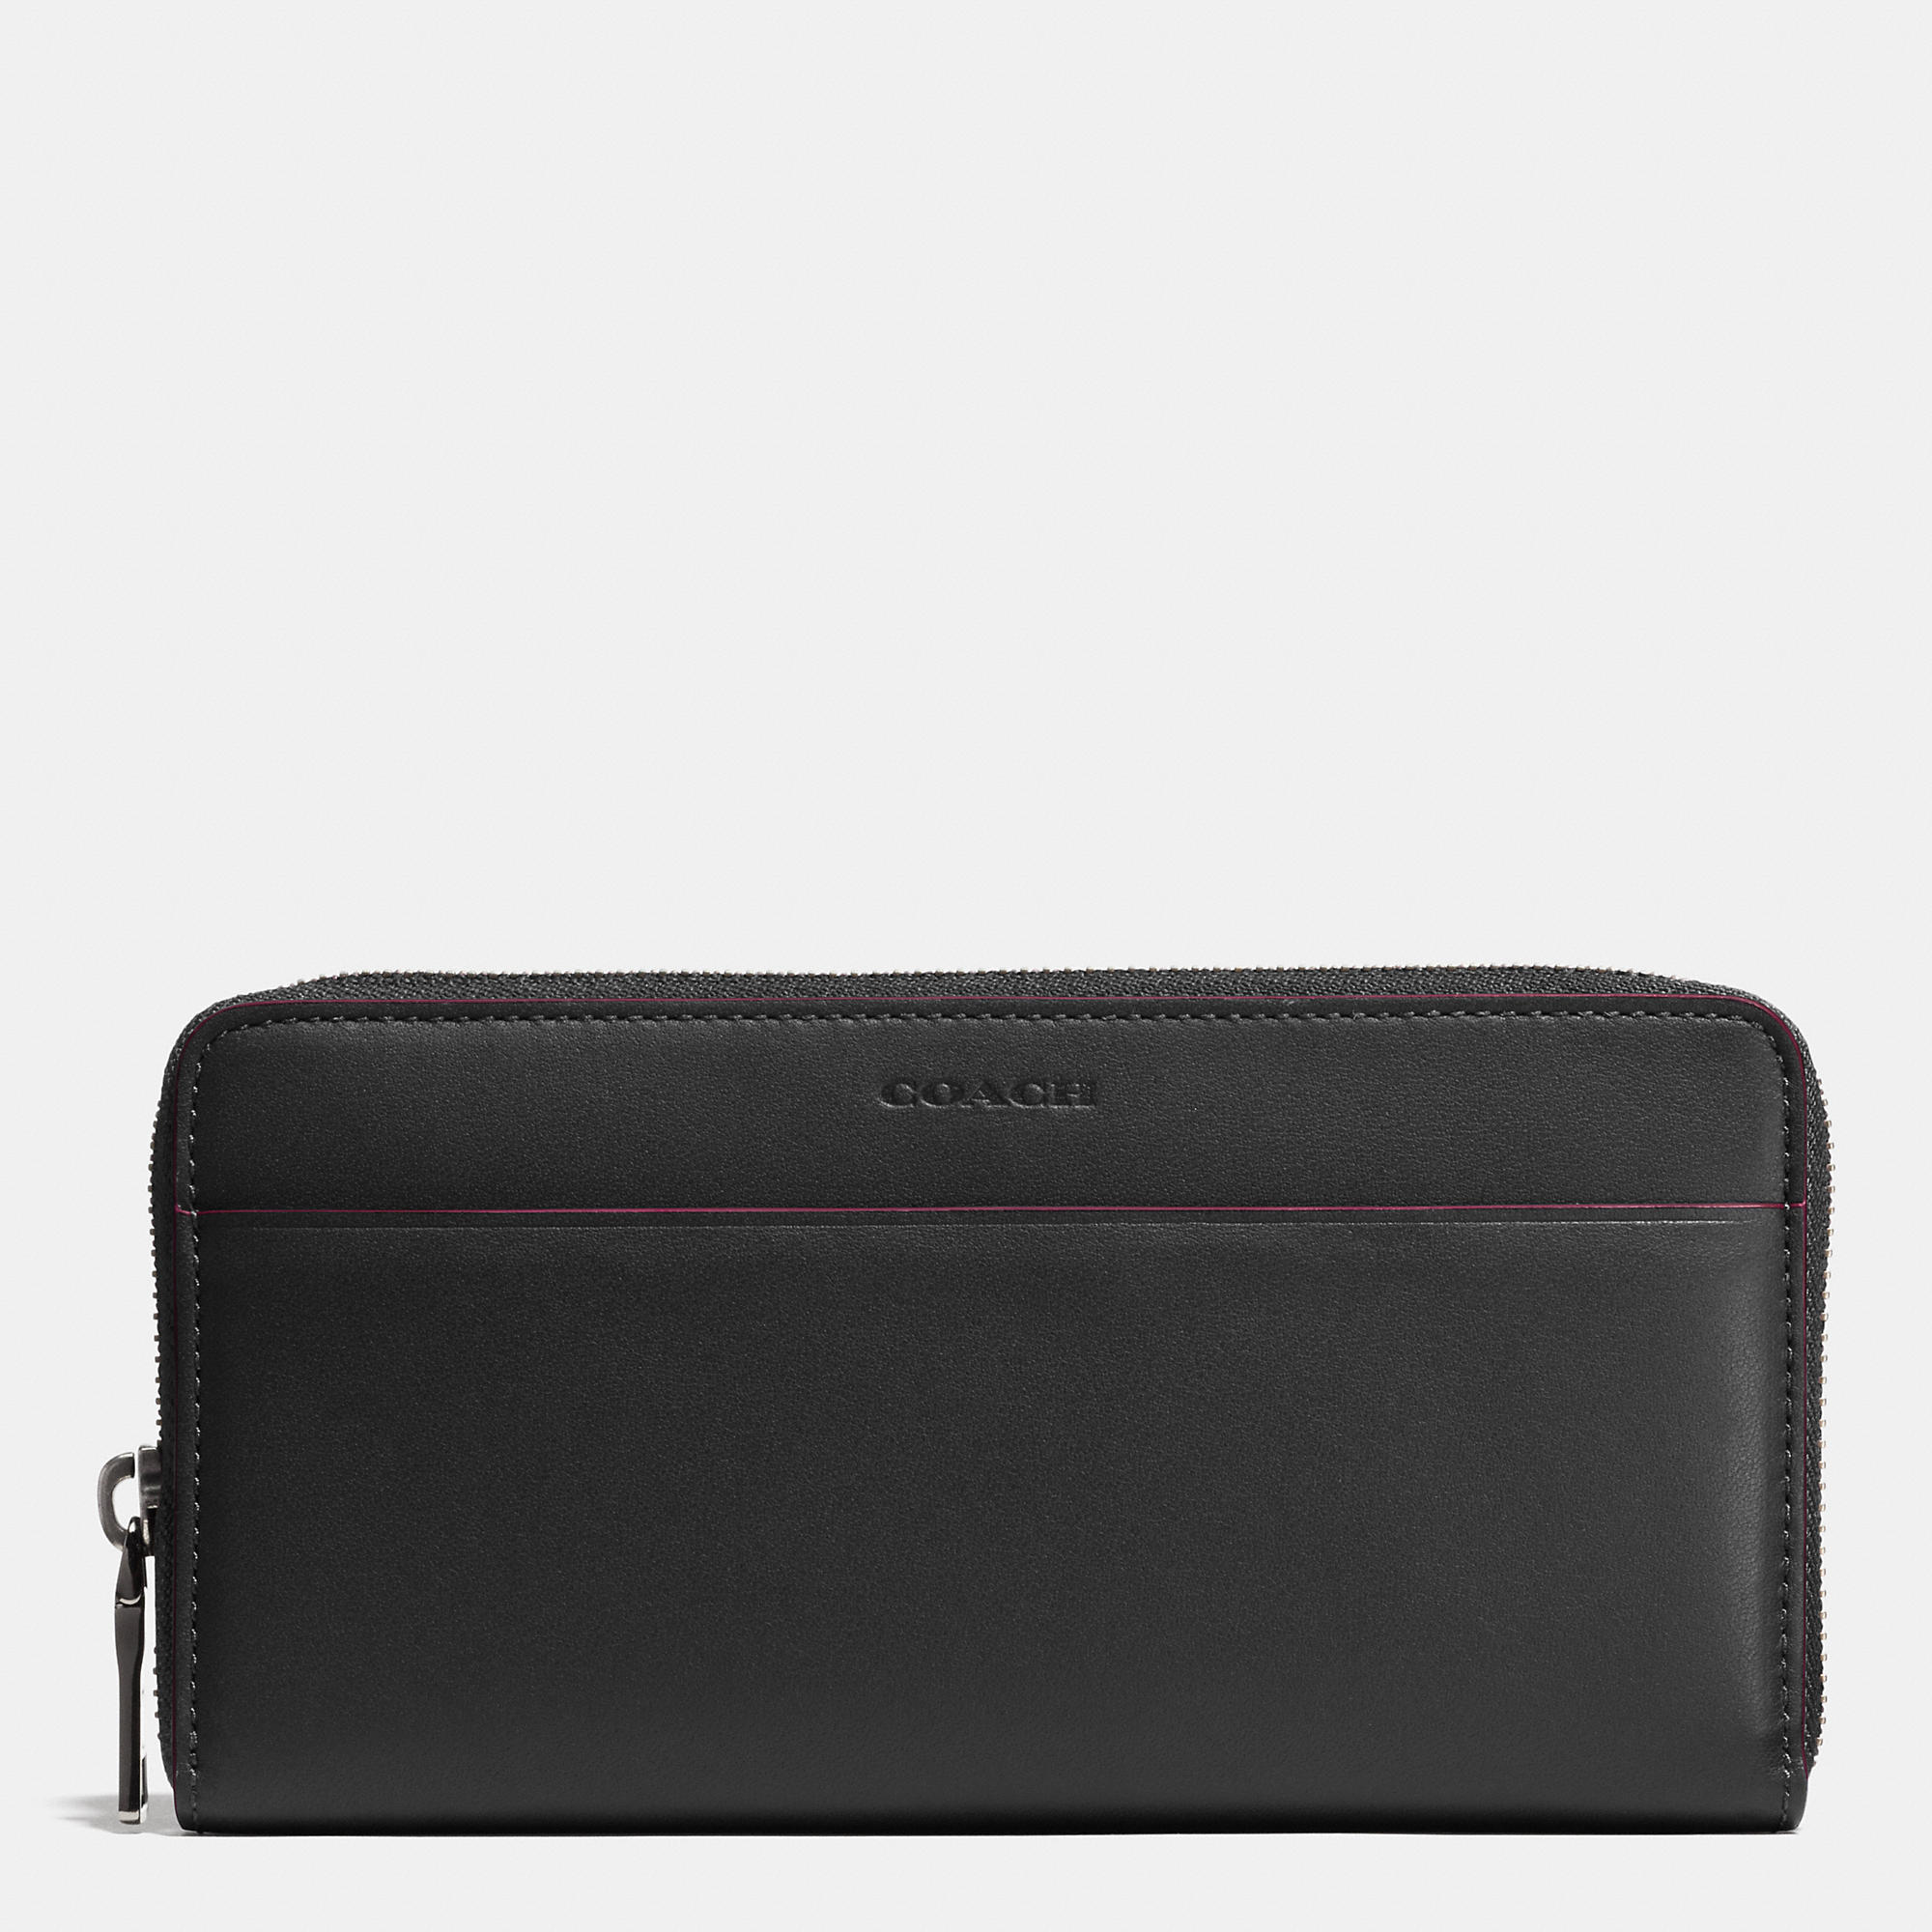 New Realer Coach Accordion Zip Wallet In Glovetanned Leather | Coach Outlet Canada